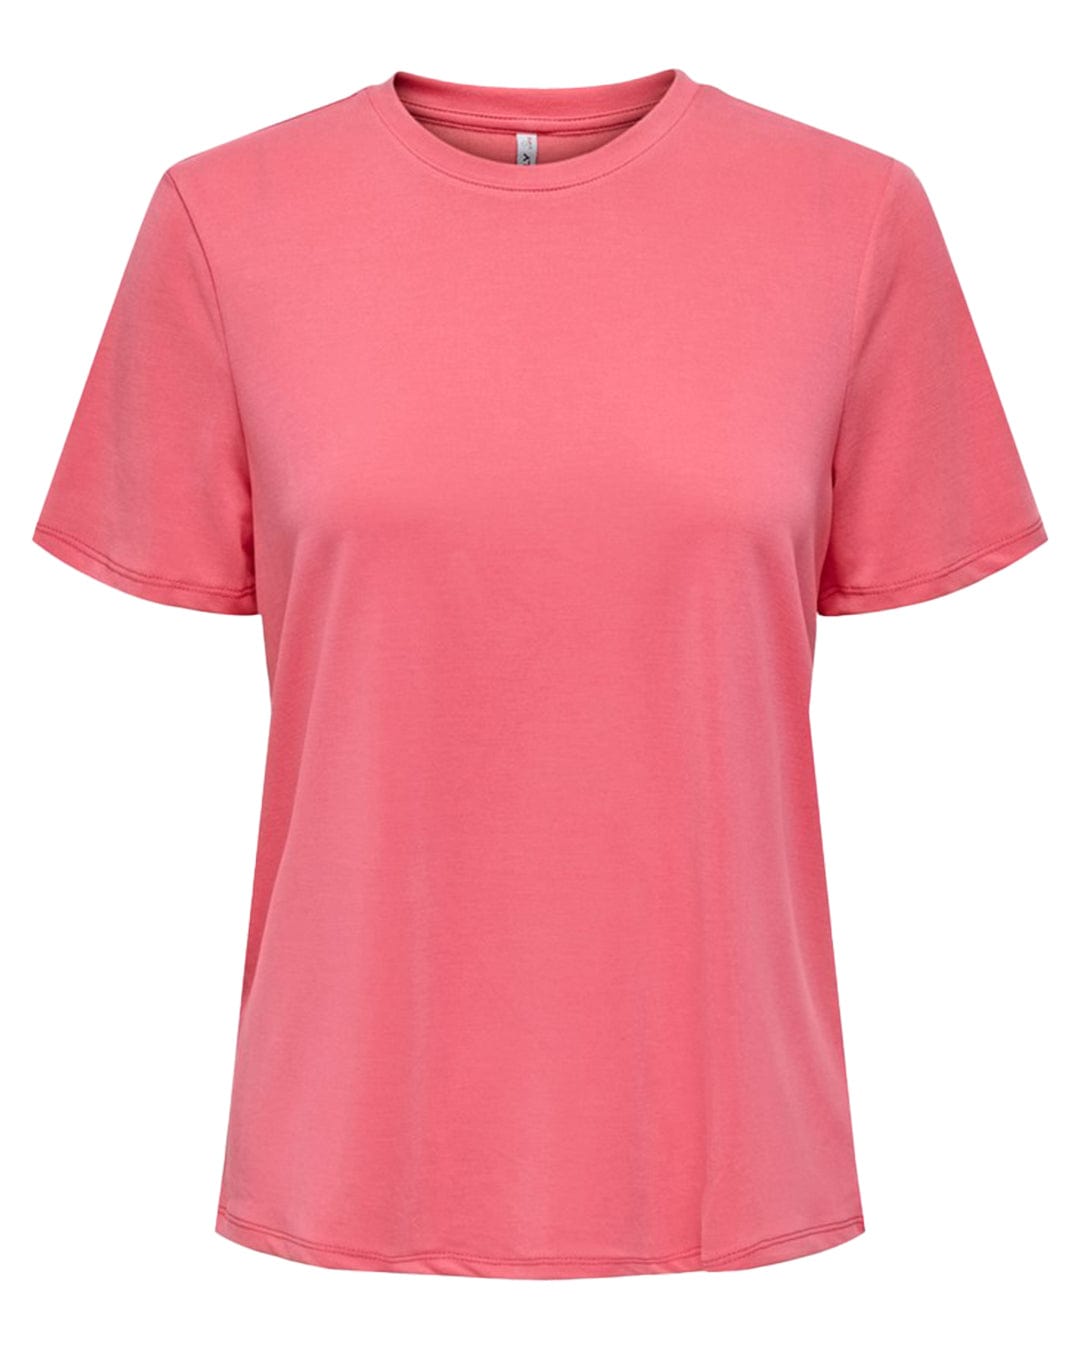 Only T-Shirts Only Free Life Short Sleeved Pink Regular T-Shirt